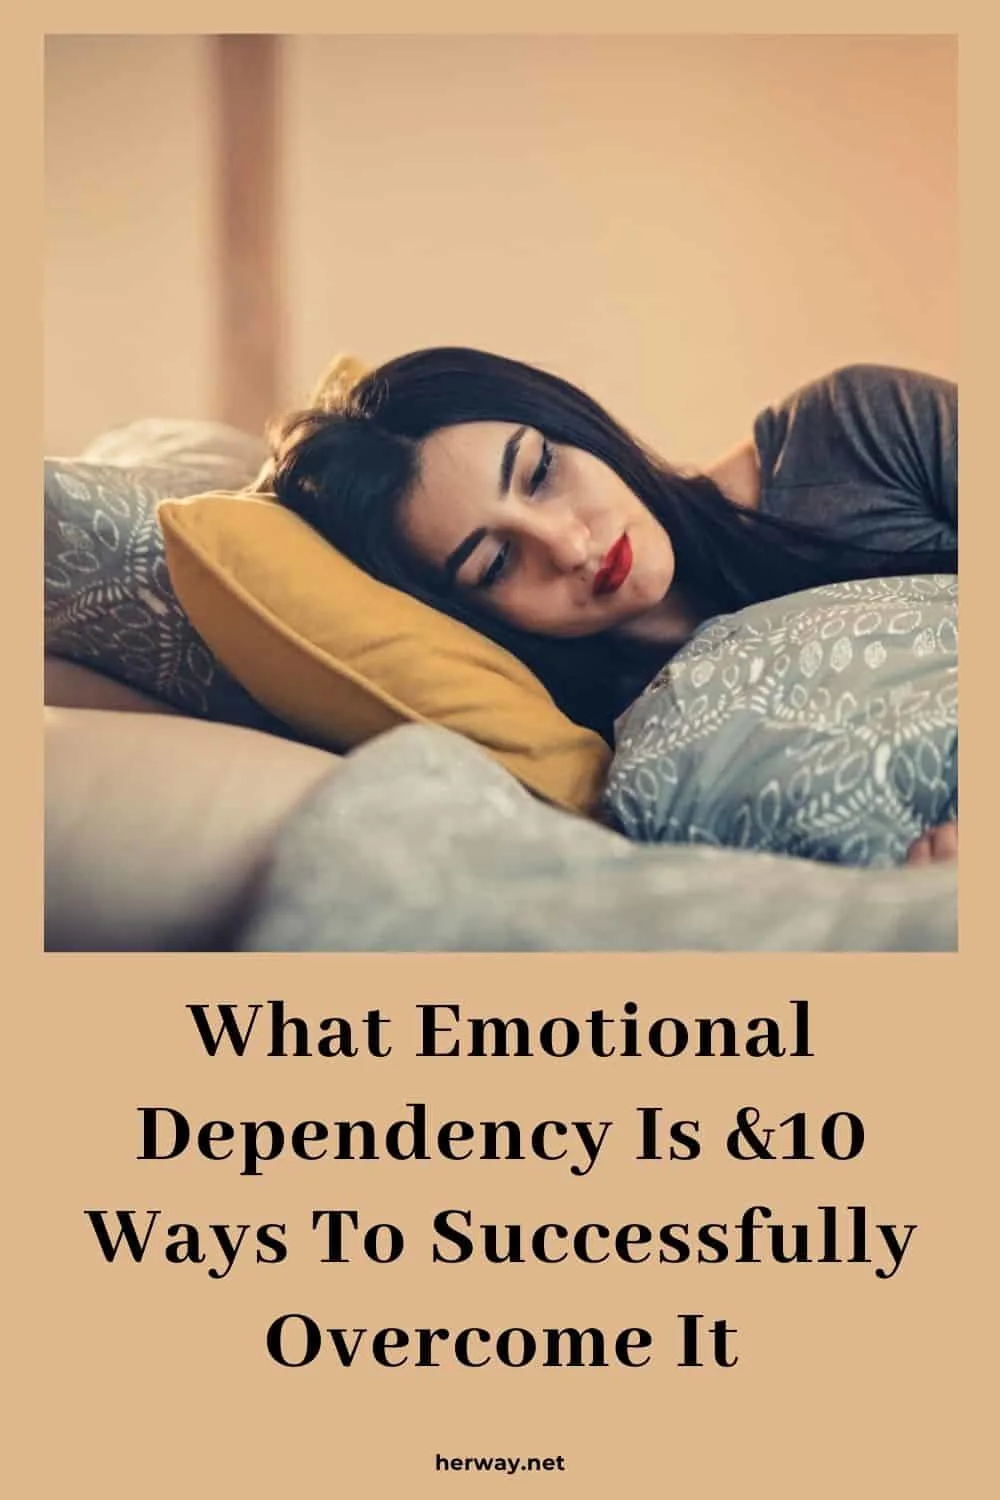 What Emotional Dependency Is &10 Ways To Successfully Overcome It